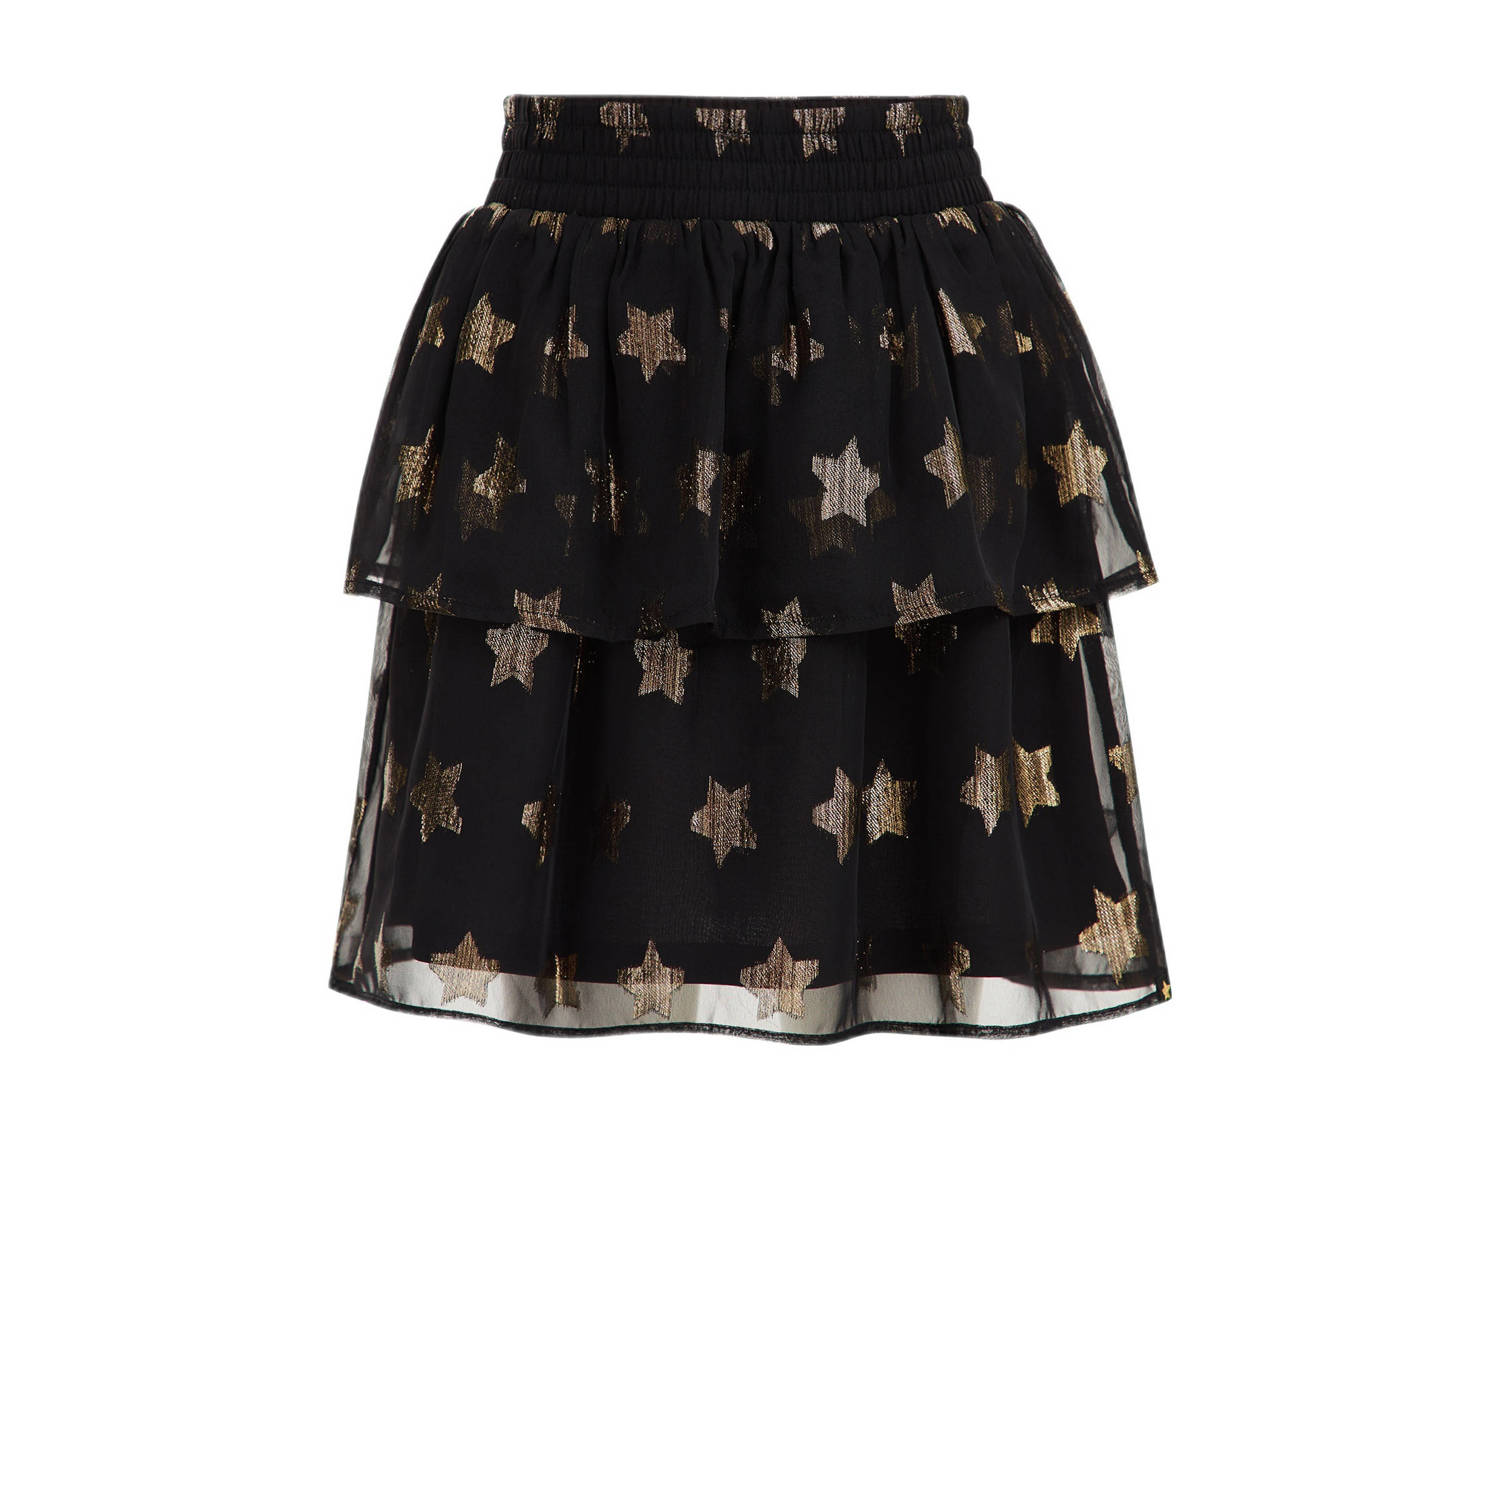 WE Fashion rok met all over print zwart goud Meisjes Polyester All over print 110 116